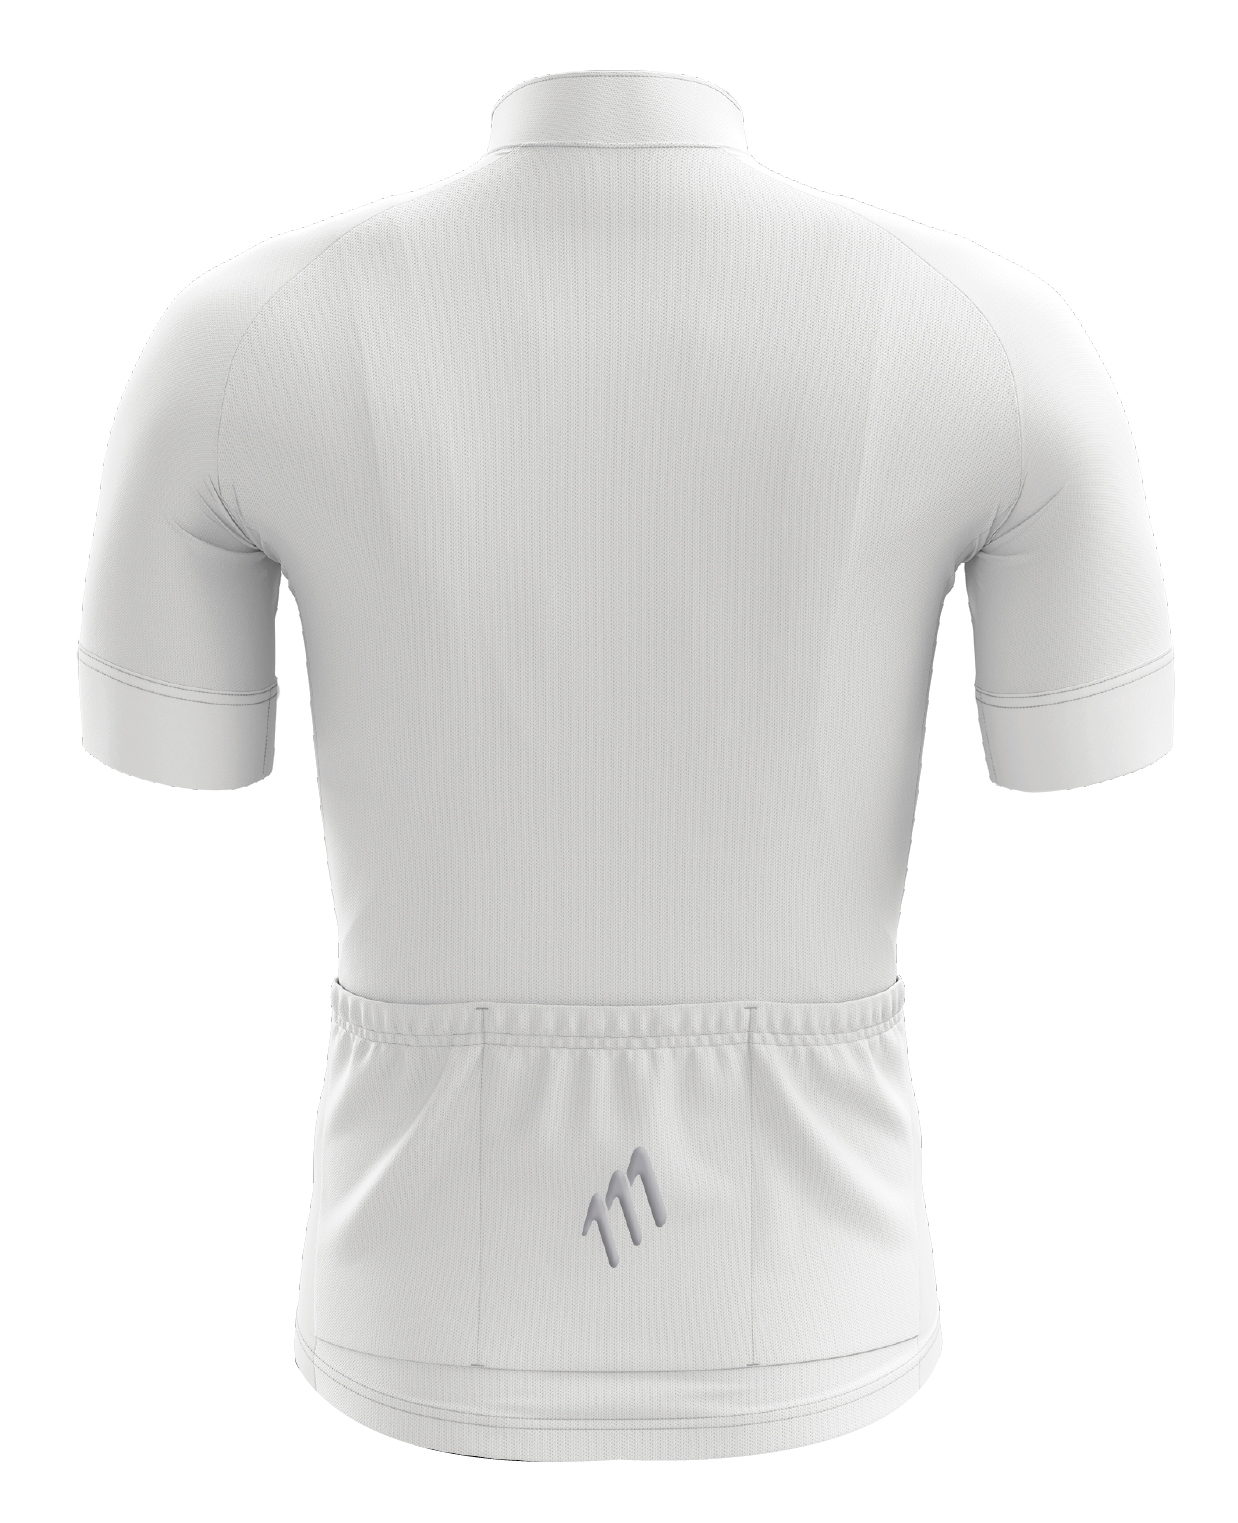 Jersey cromatic white women - 111 Cientonce